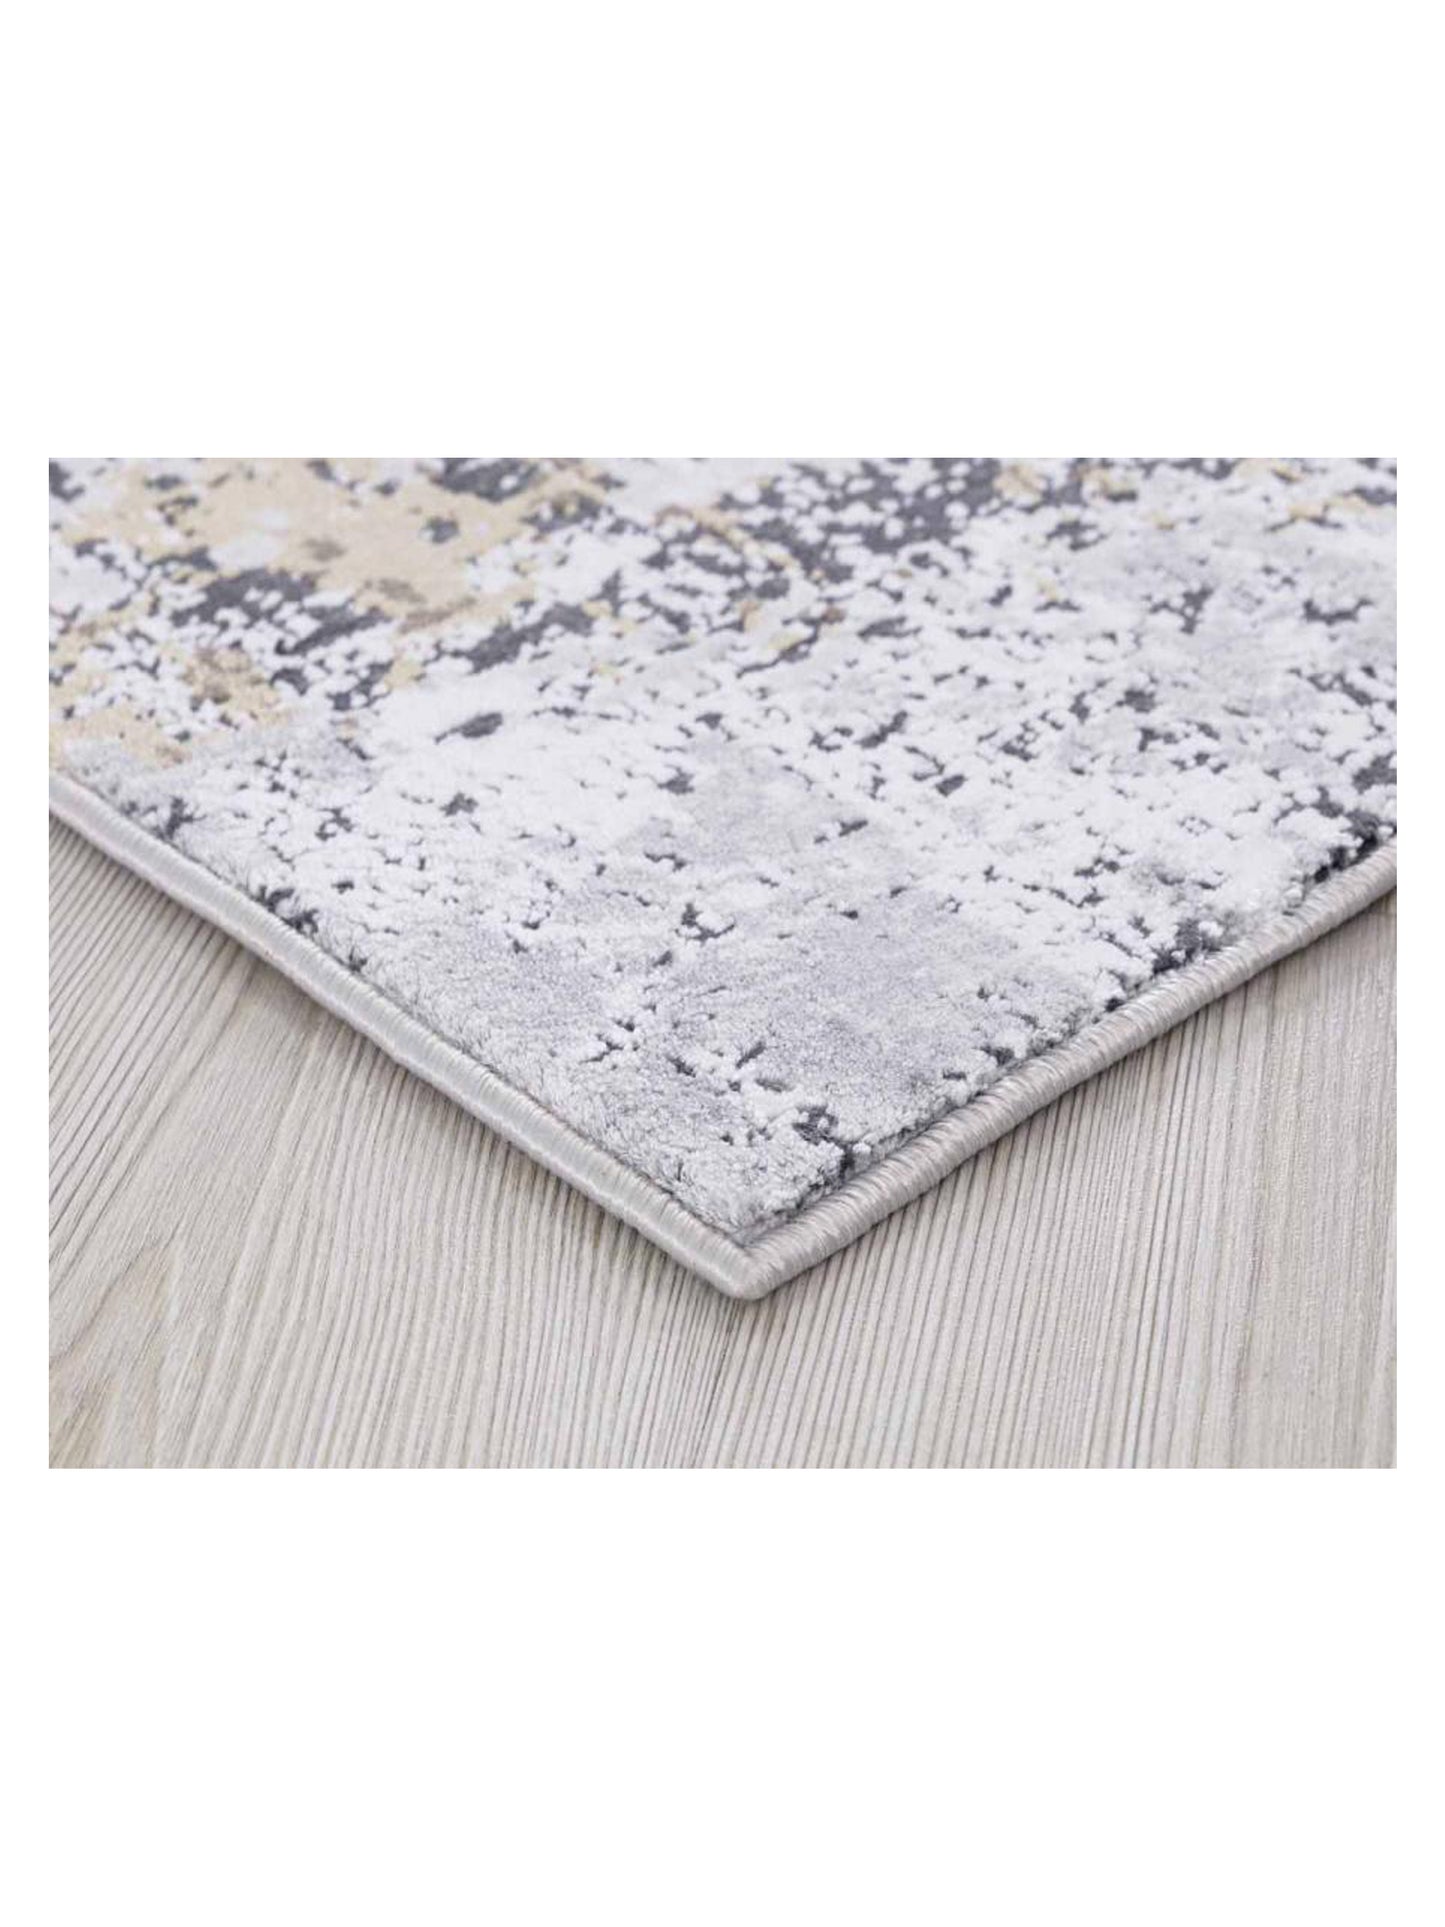 Limited Courteney CY-255 GRAY GOLD Transitional Machinemade Rug